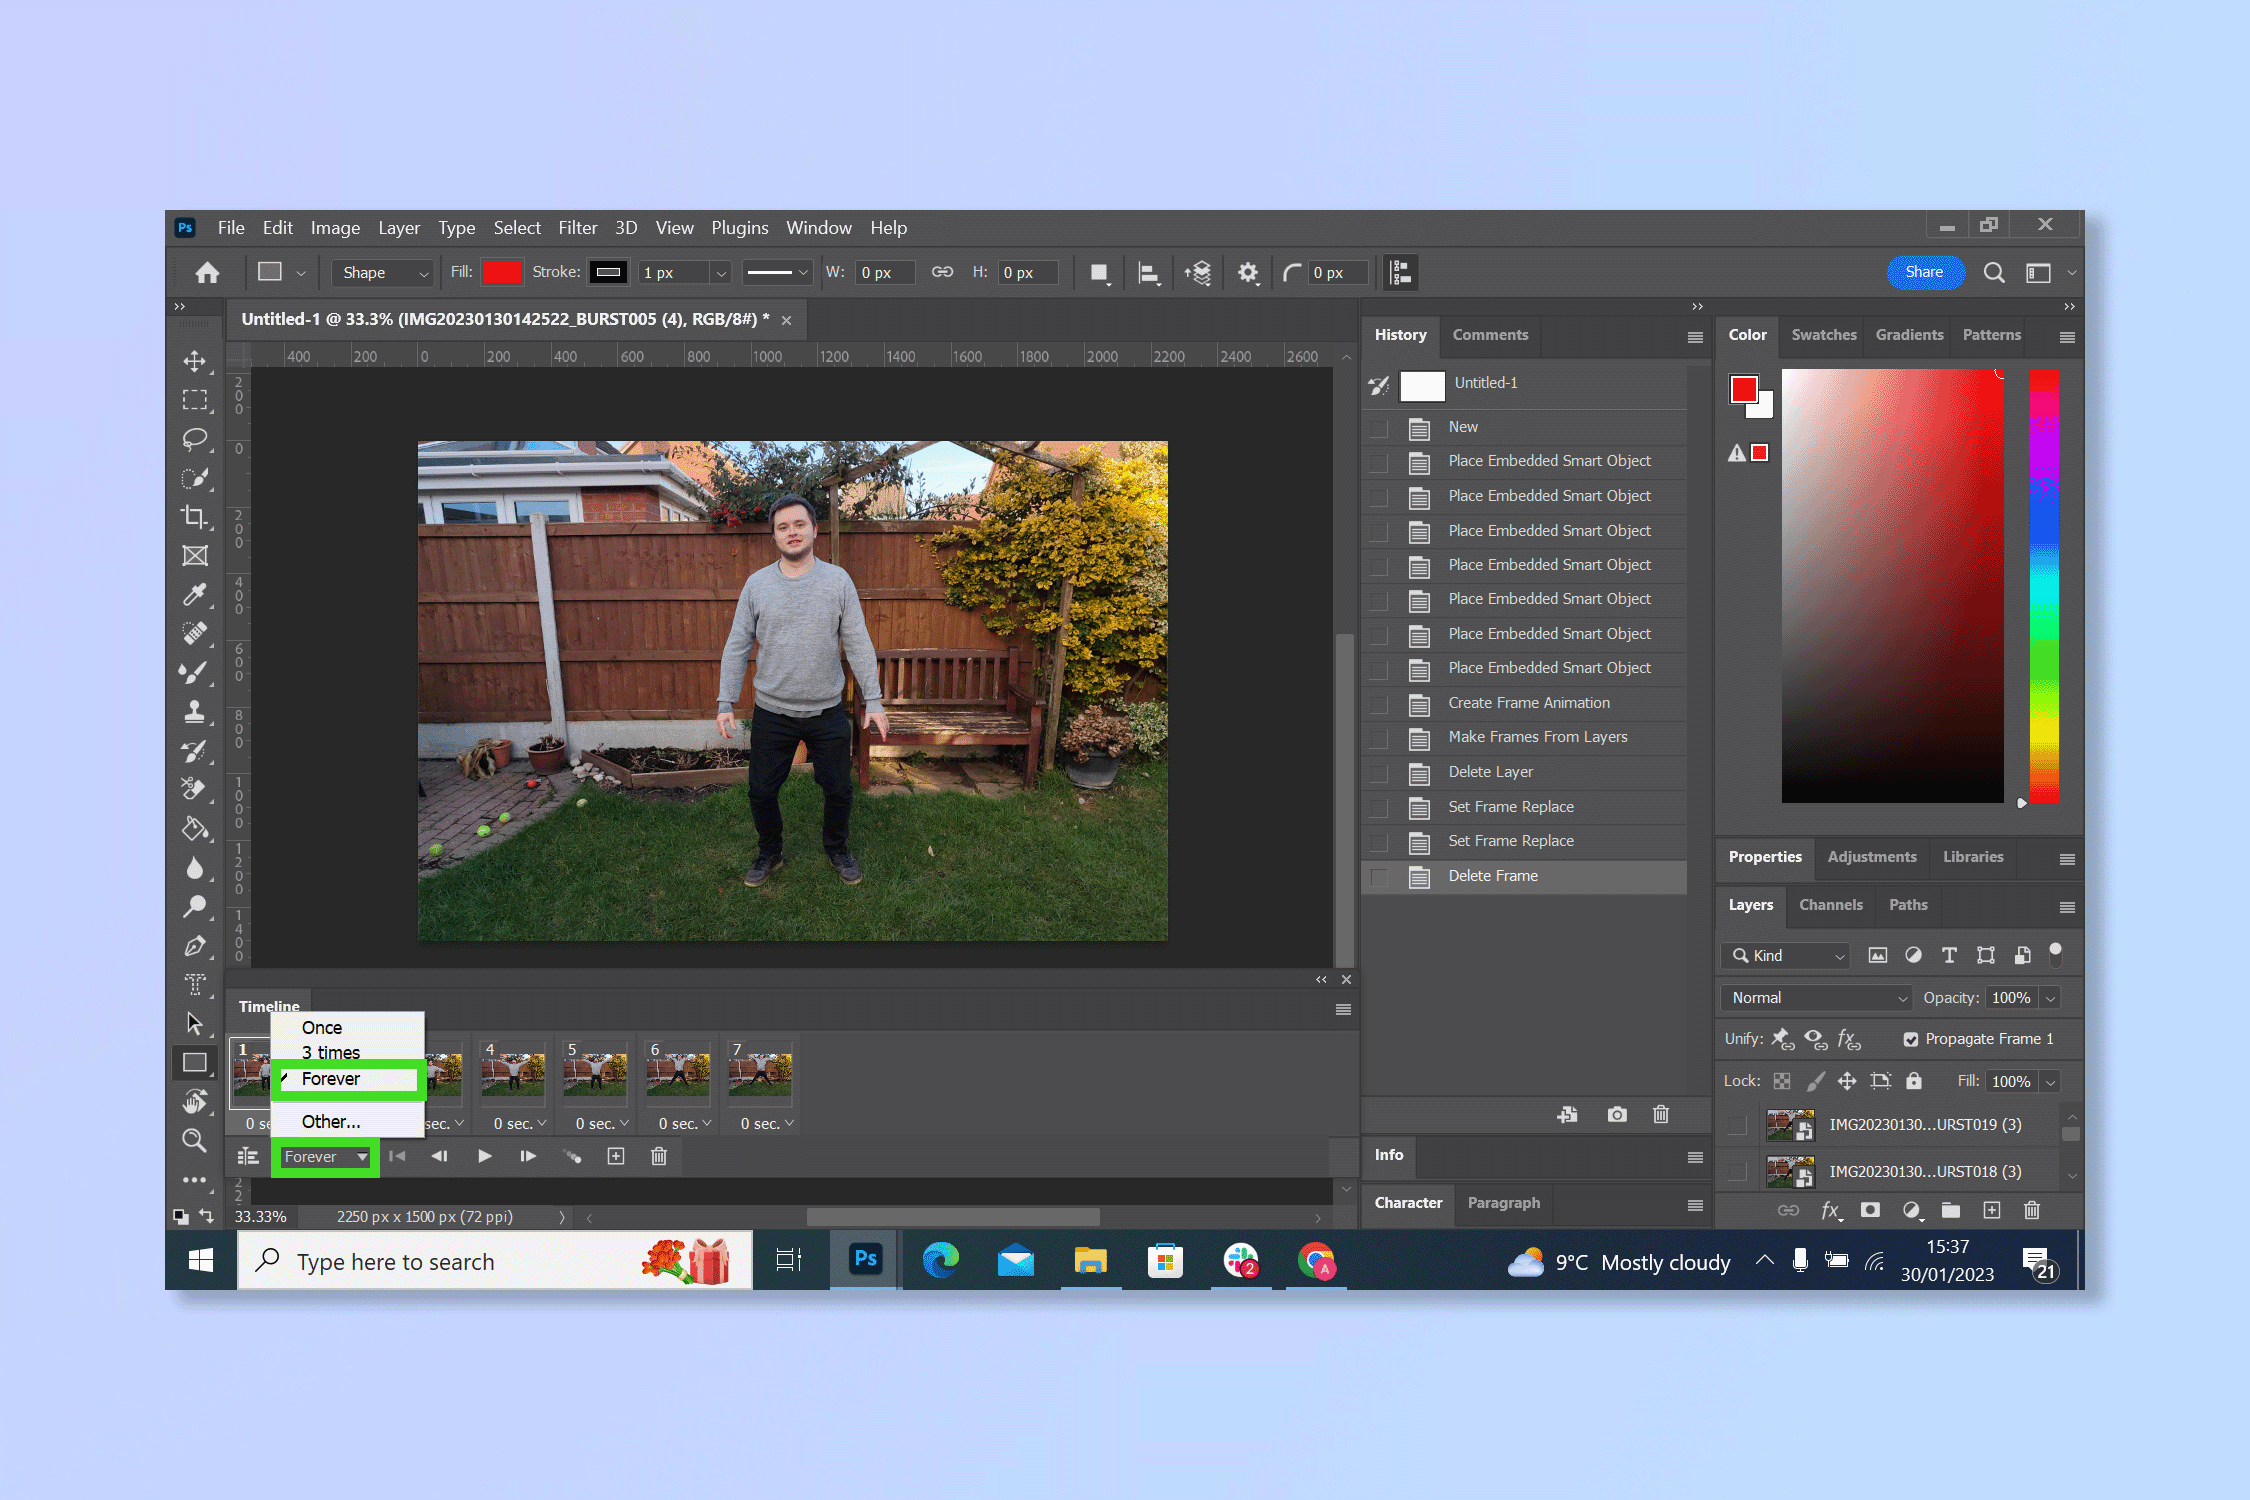 The fifth step to creating a GIF on Photoshop